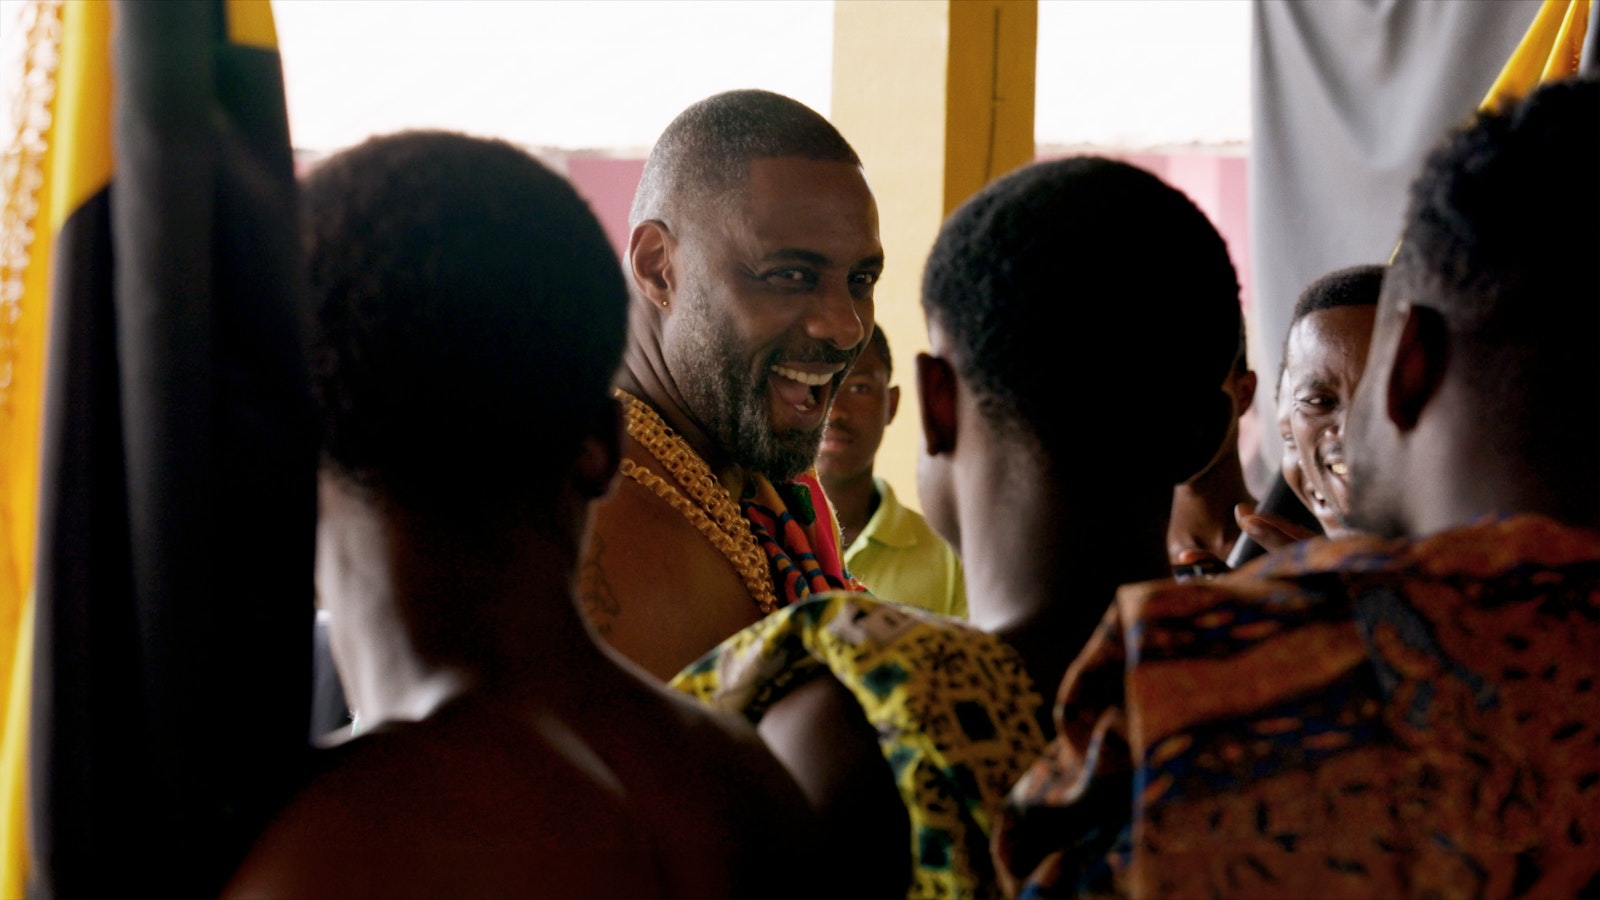 Idris Elba smiles and laughs while celebrating at the festival. In front of him we see the backs of two festival goers' heads.